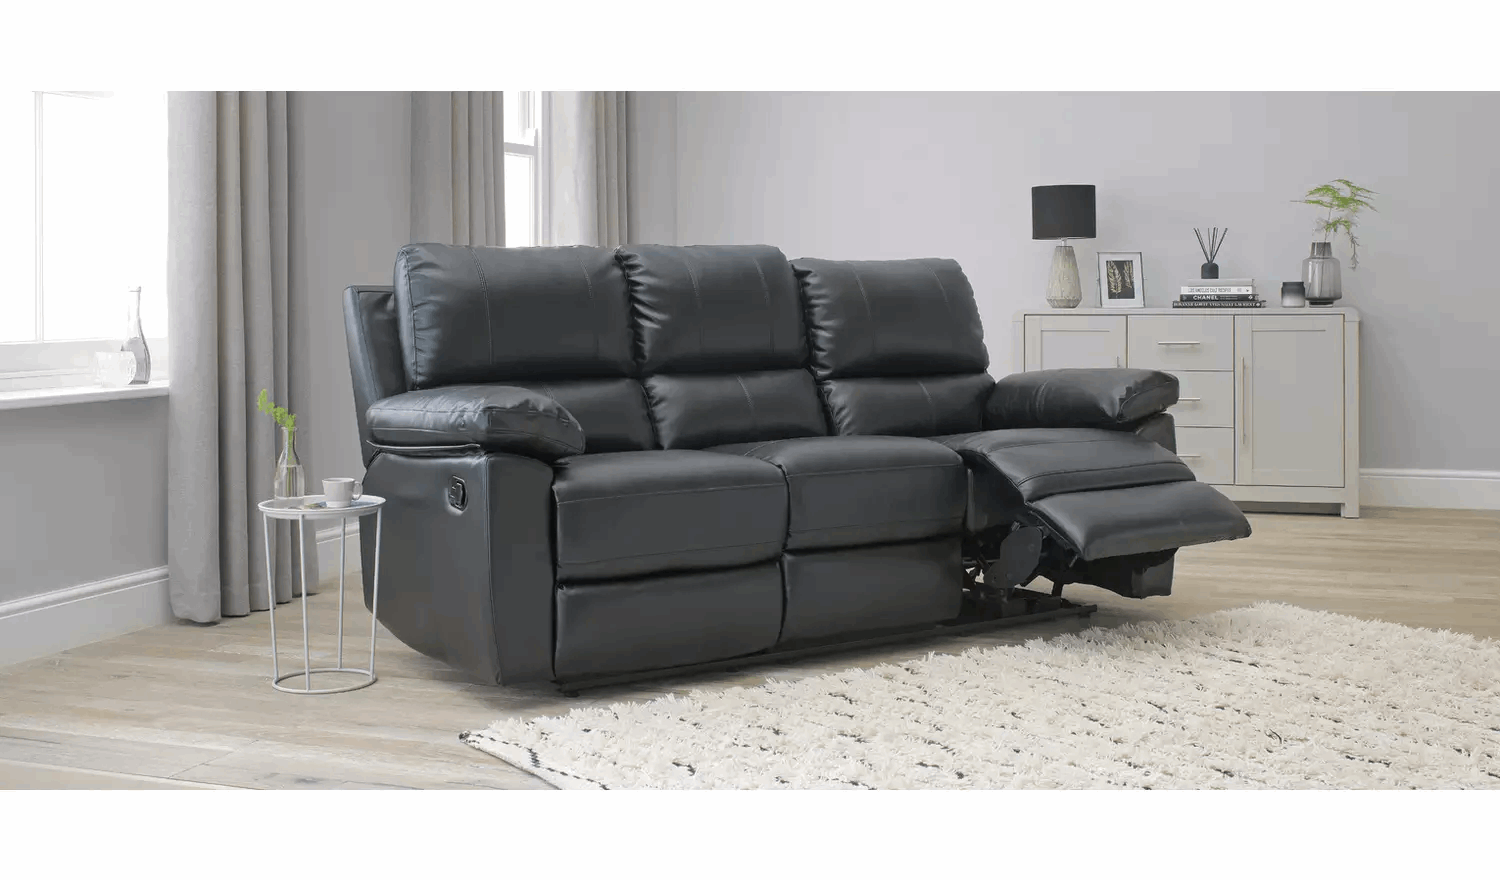 Home Toby Faux Leather 3 Seater Recliner Sofa - Black